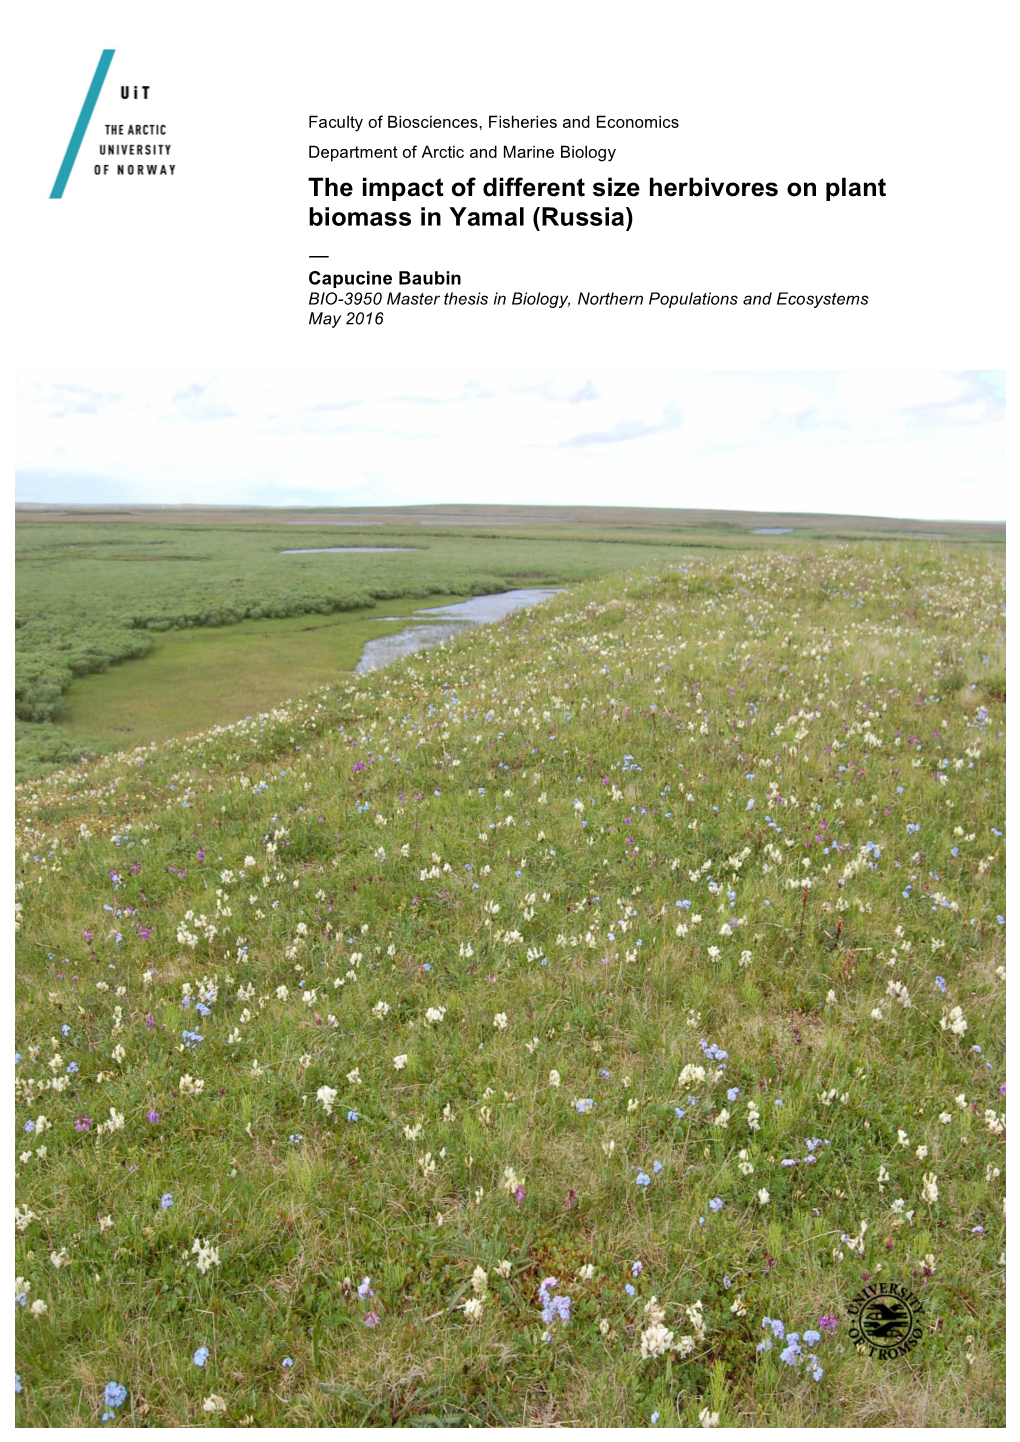 The Impact of Different Size Herbivores on Plant Biomass in Yamal